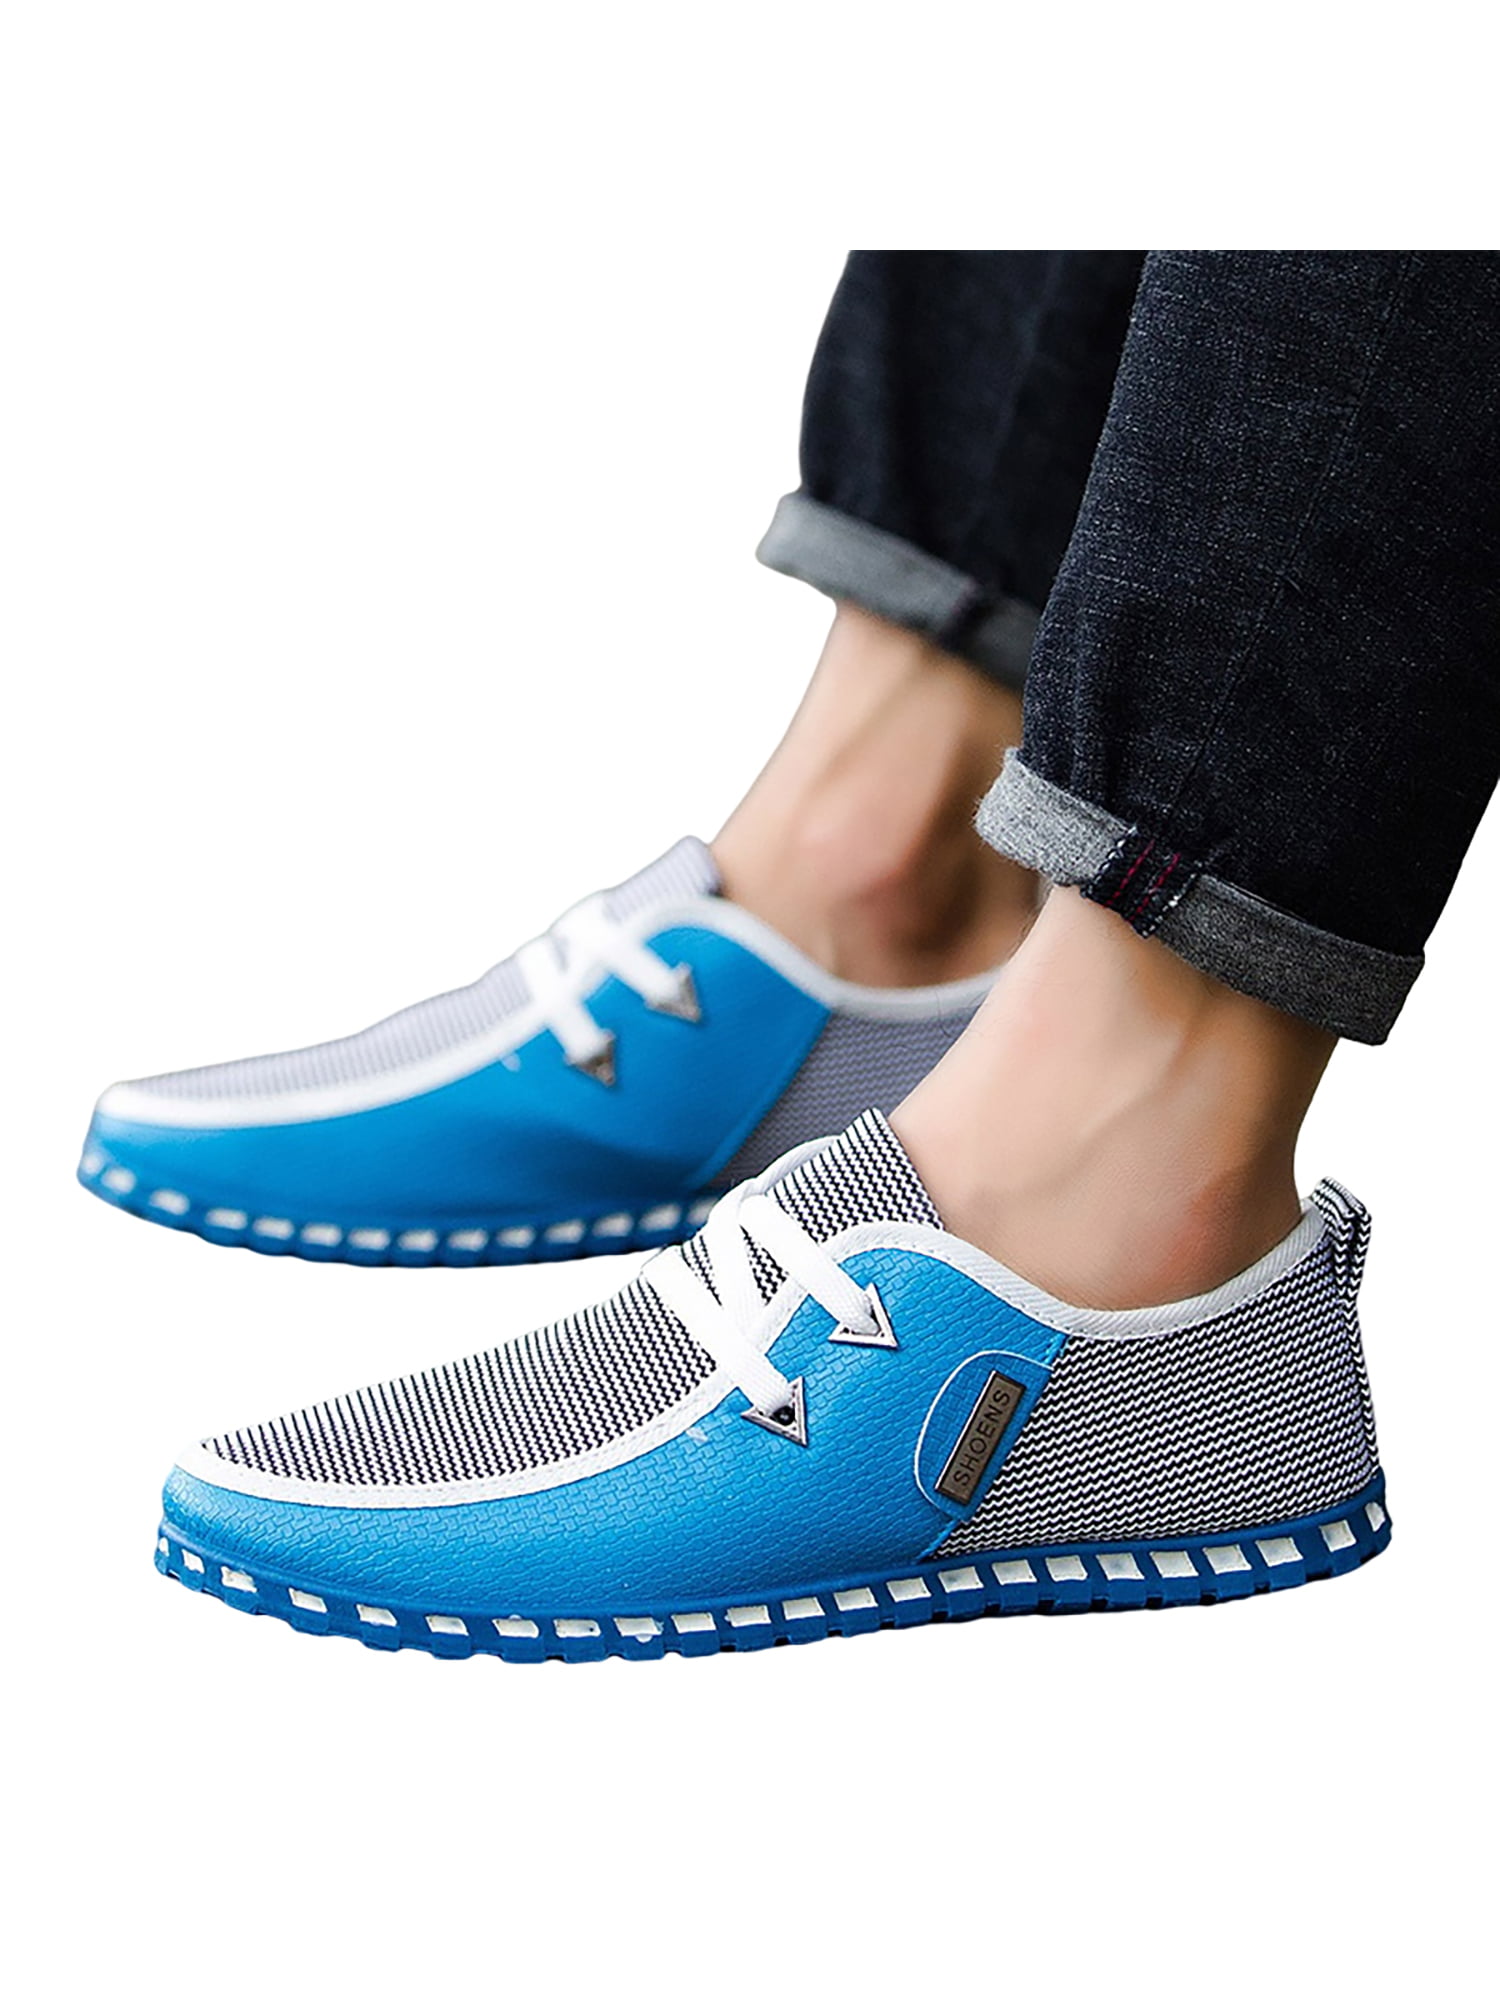 Urban Lifestyle Camera Lace Up Loafers Canvas Skate Shoes for Women Round Toe 